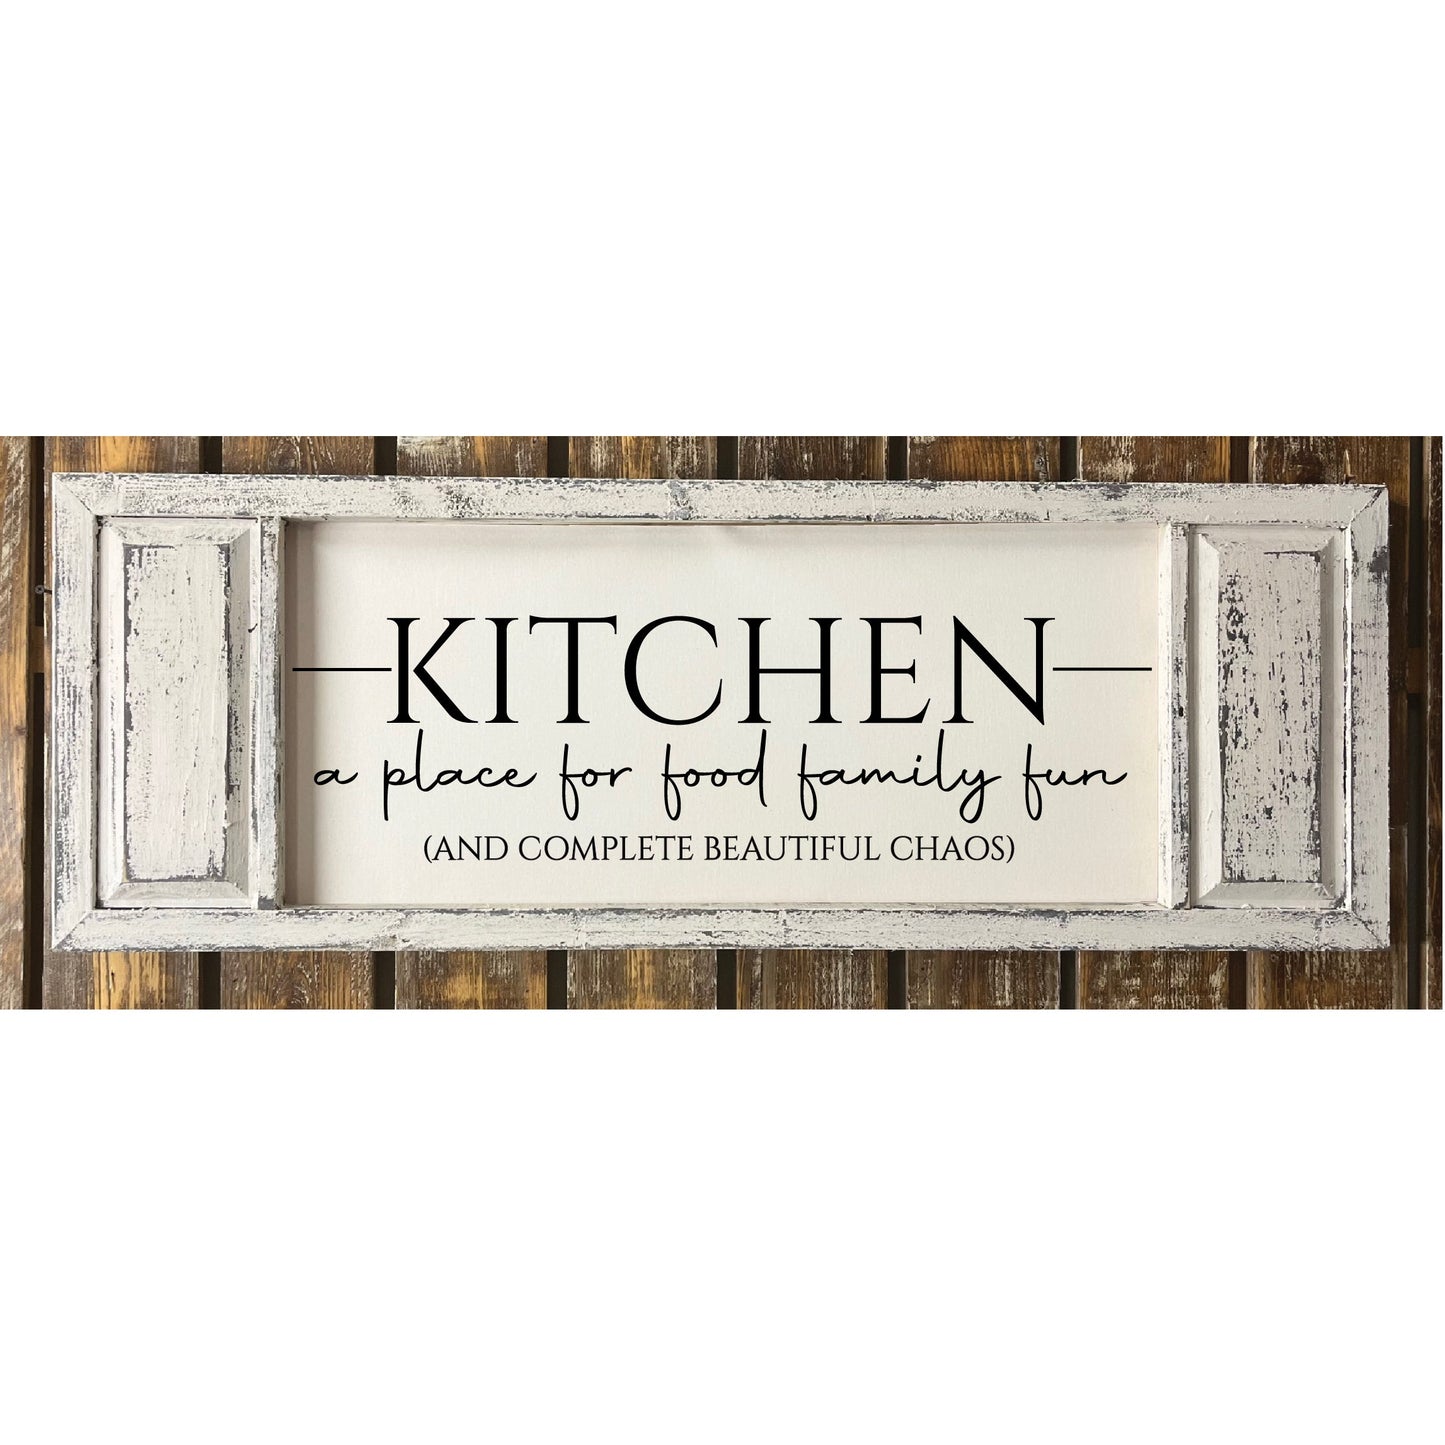 Kitchen.. A Place for Food Family Fun